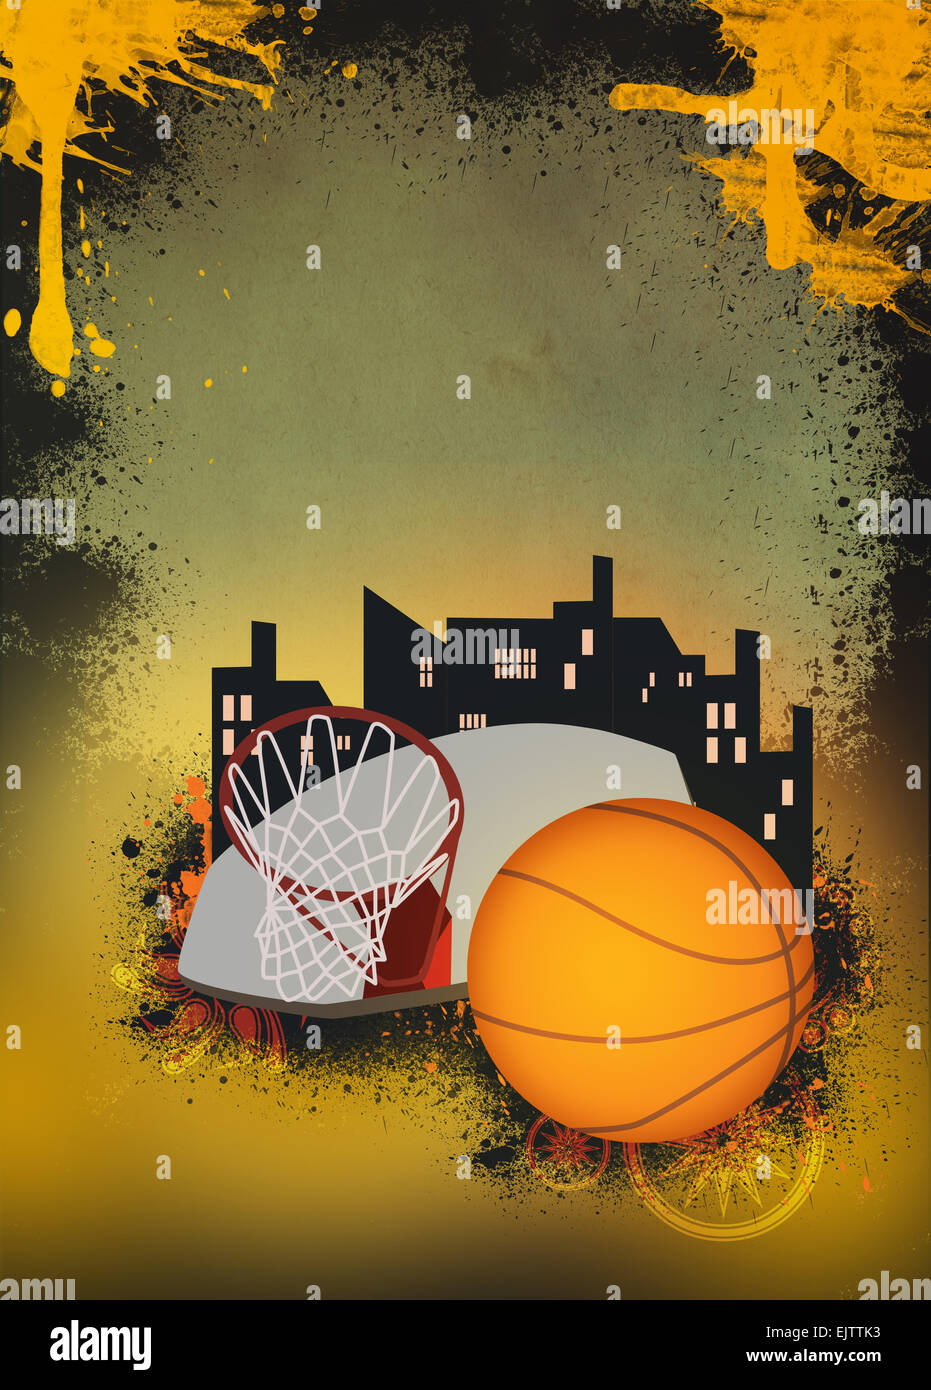 Basketball sport poster or flyer background with space Stock Photo - Alamy